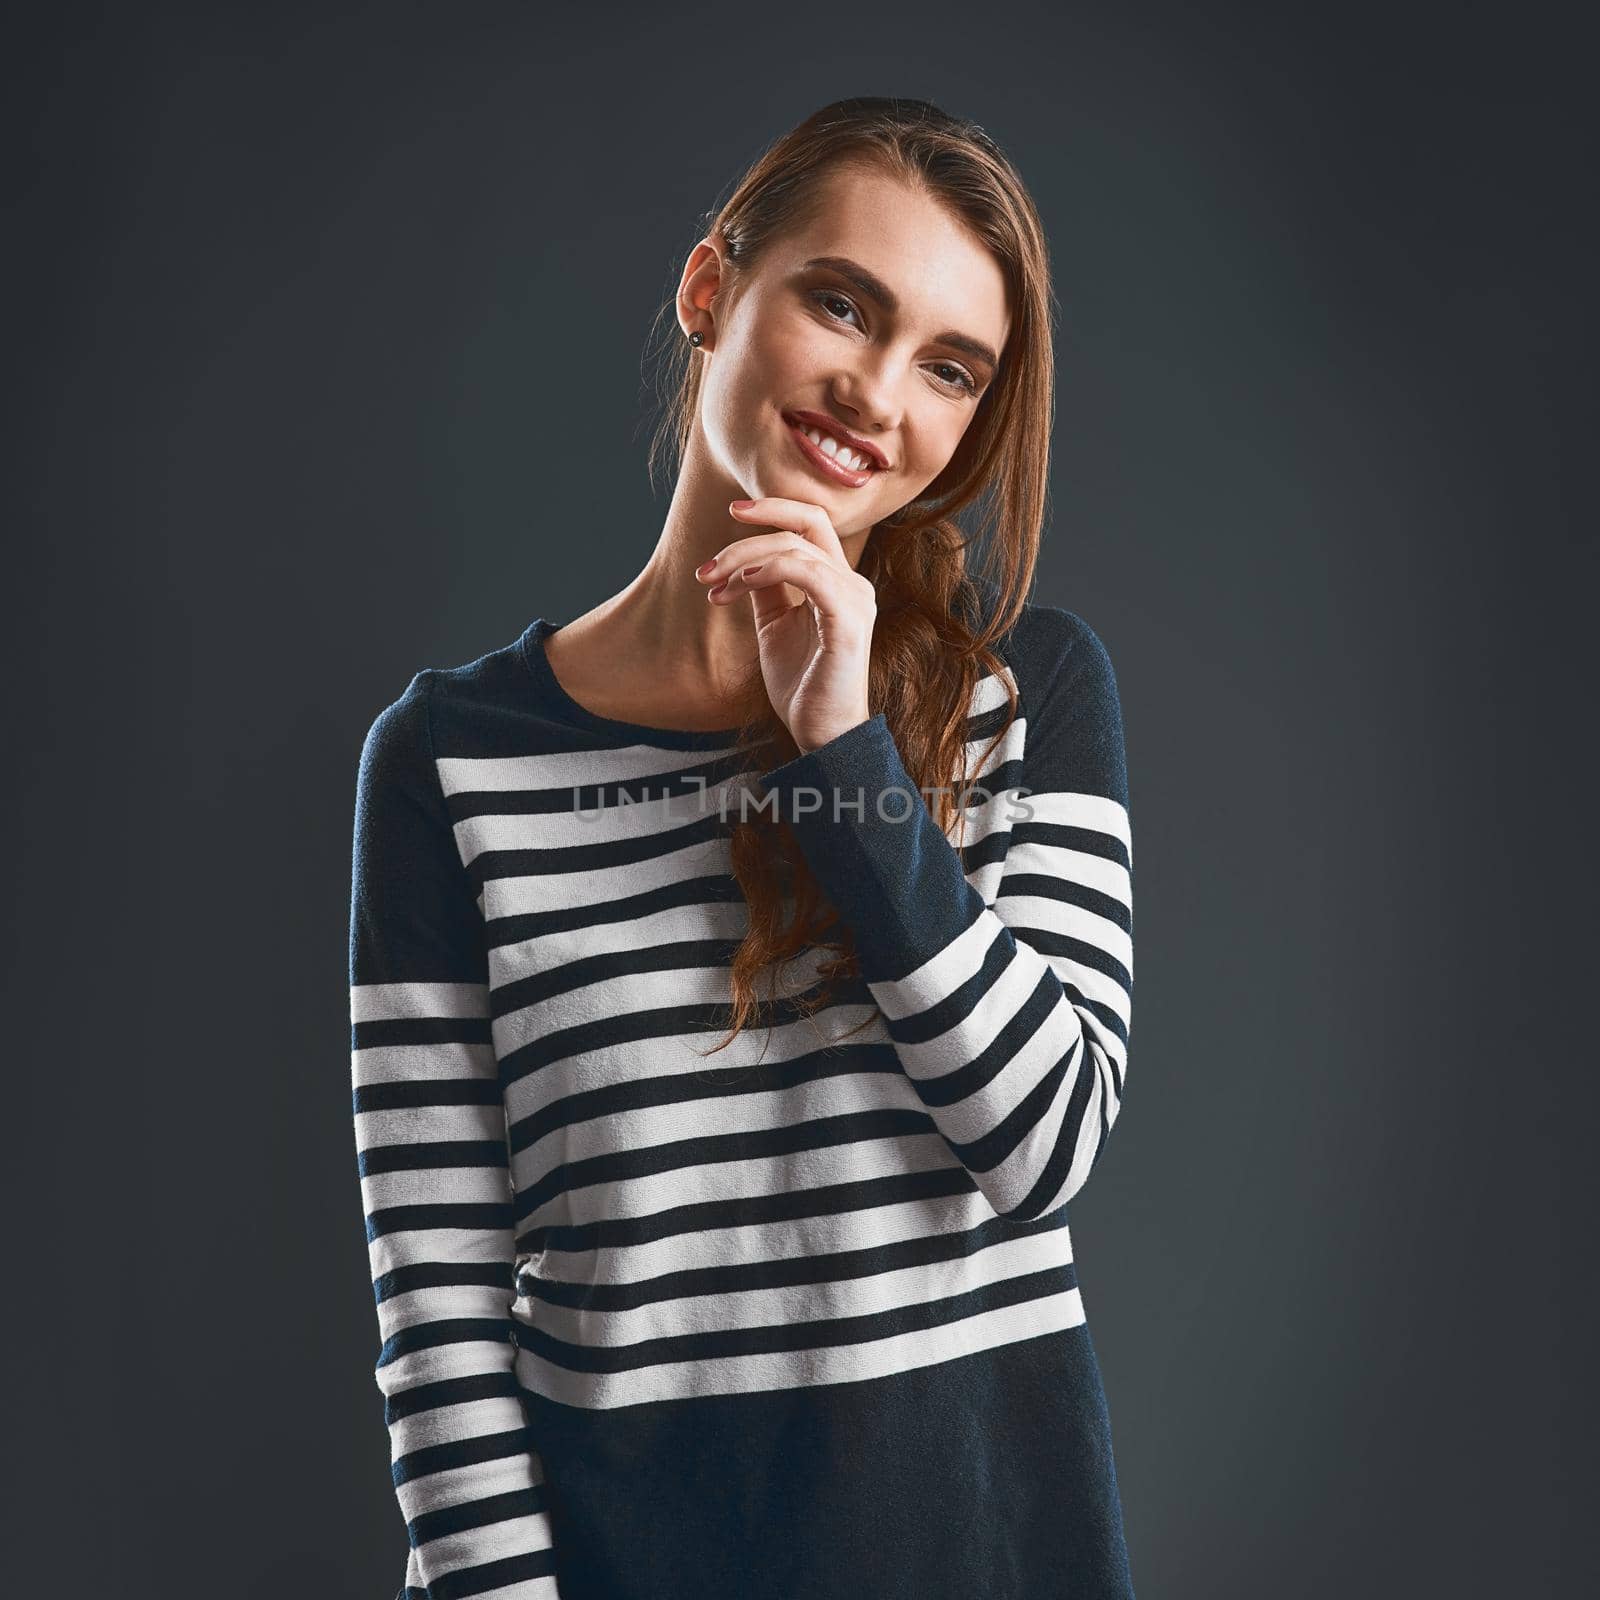 Studio portrait of a cheerful young woman holding her chin while standing against a dark background.